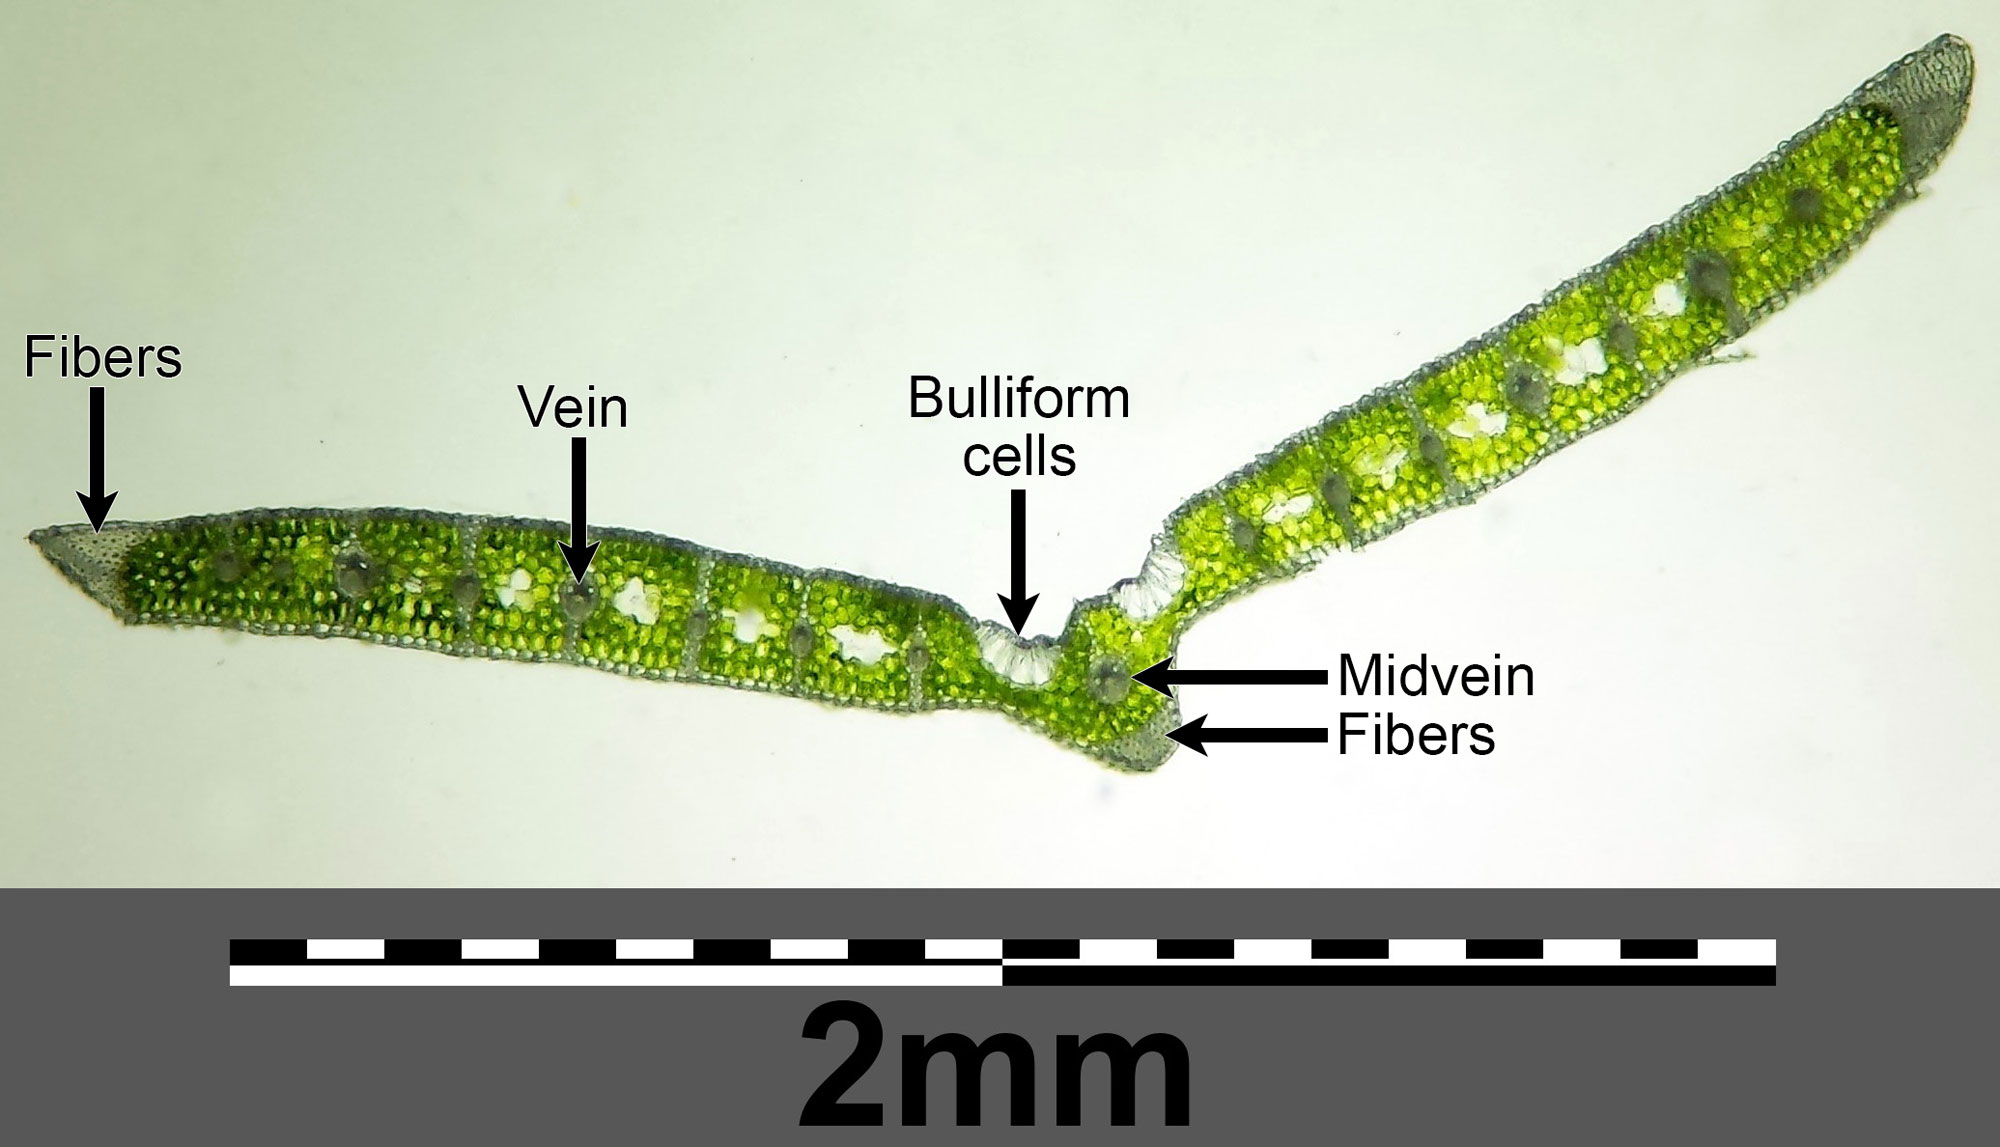 Photograph of a fresh cross section of a blue moor grass leaf; this leaf is not stained. The photo shows a thin leaf with a large midvein that projects from the underside of the leaf. Nest of fibers occur at the sides of the leaf and beneath the midvein. Multiple vascular bundles occur in a line to either side of the midvein. Each vascular bundle has a band of thick walls cells extending to the upper and lower surfaces of the leaf. The mesophyll tissue is green.